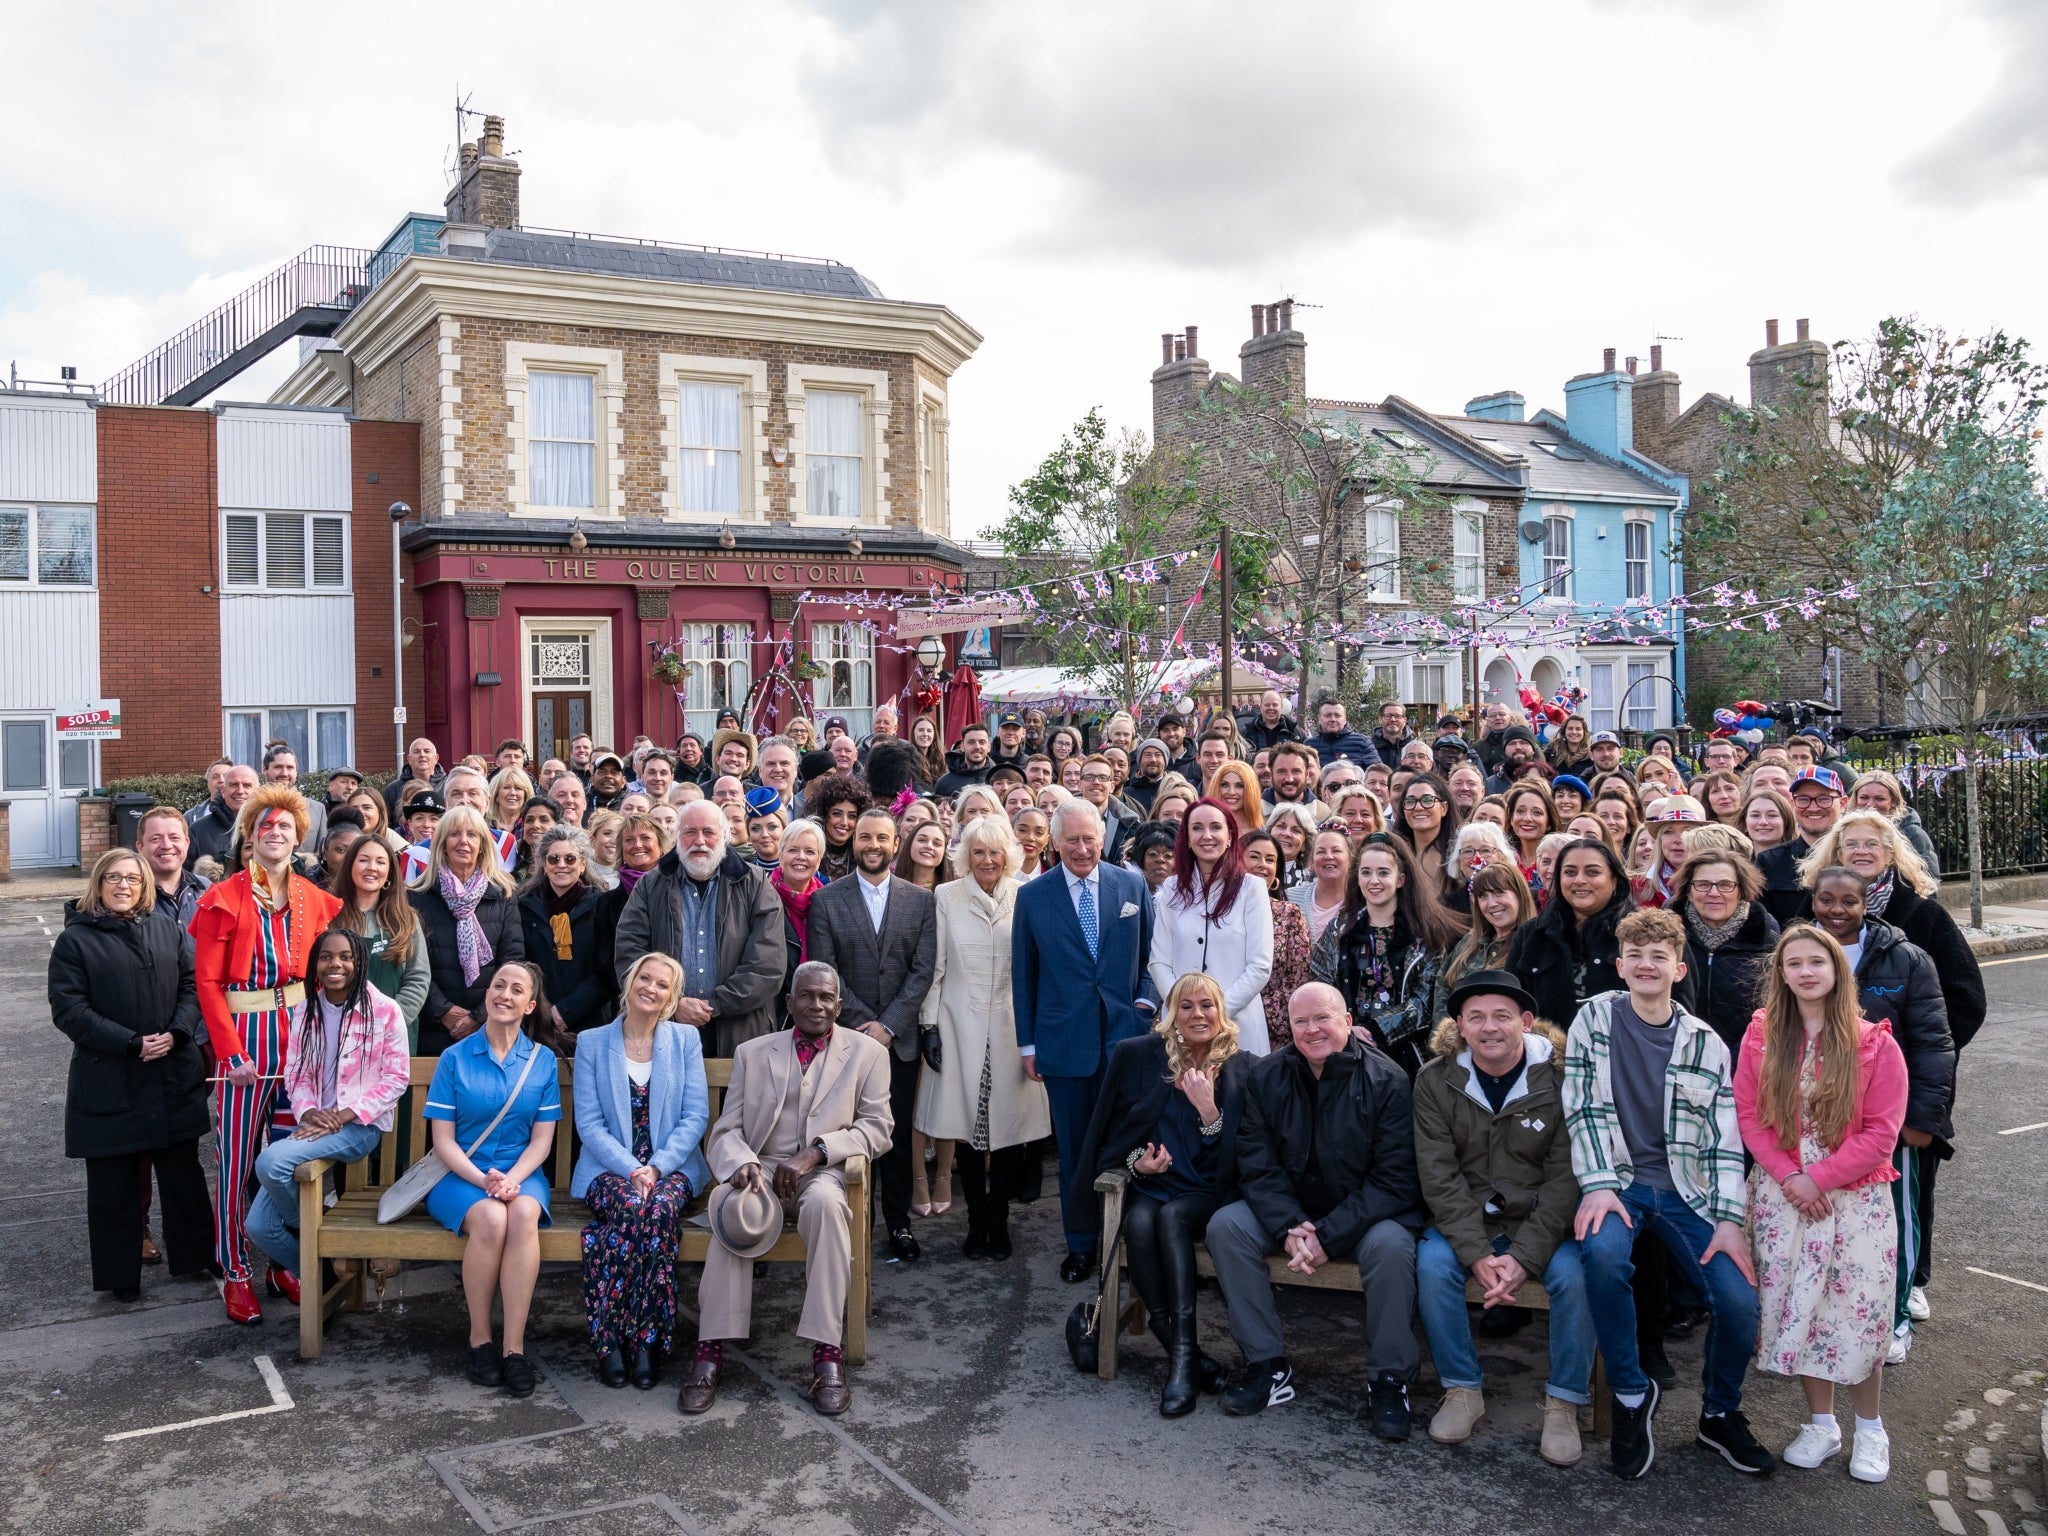 Prince Charles and Camilla with the cast and crew of EastEnders